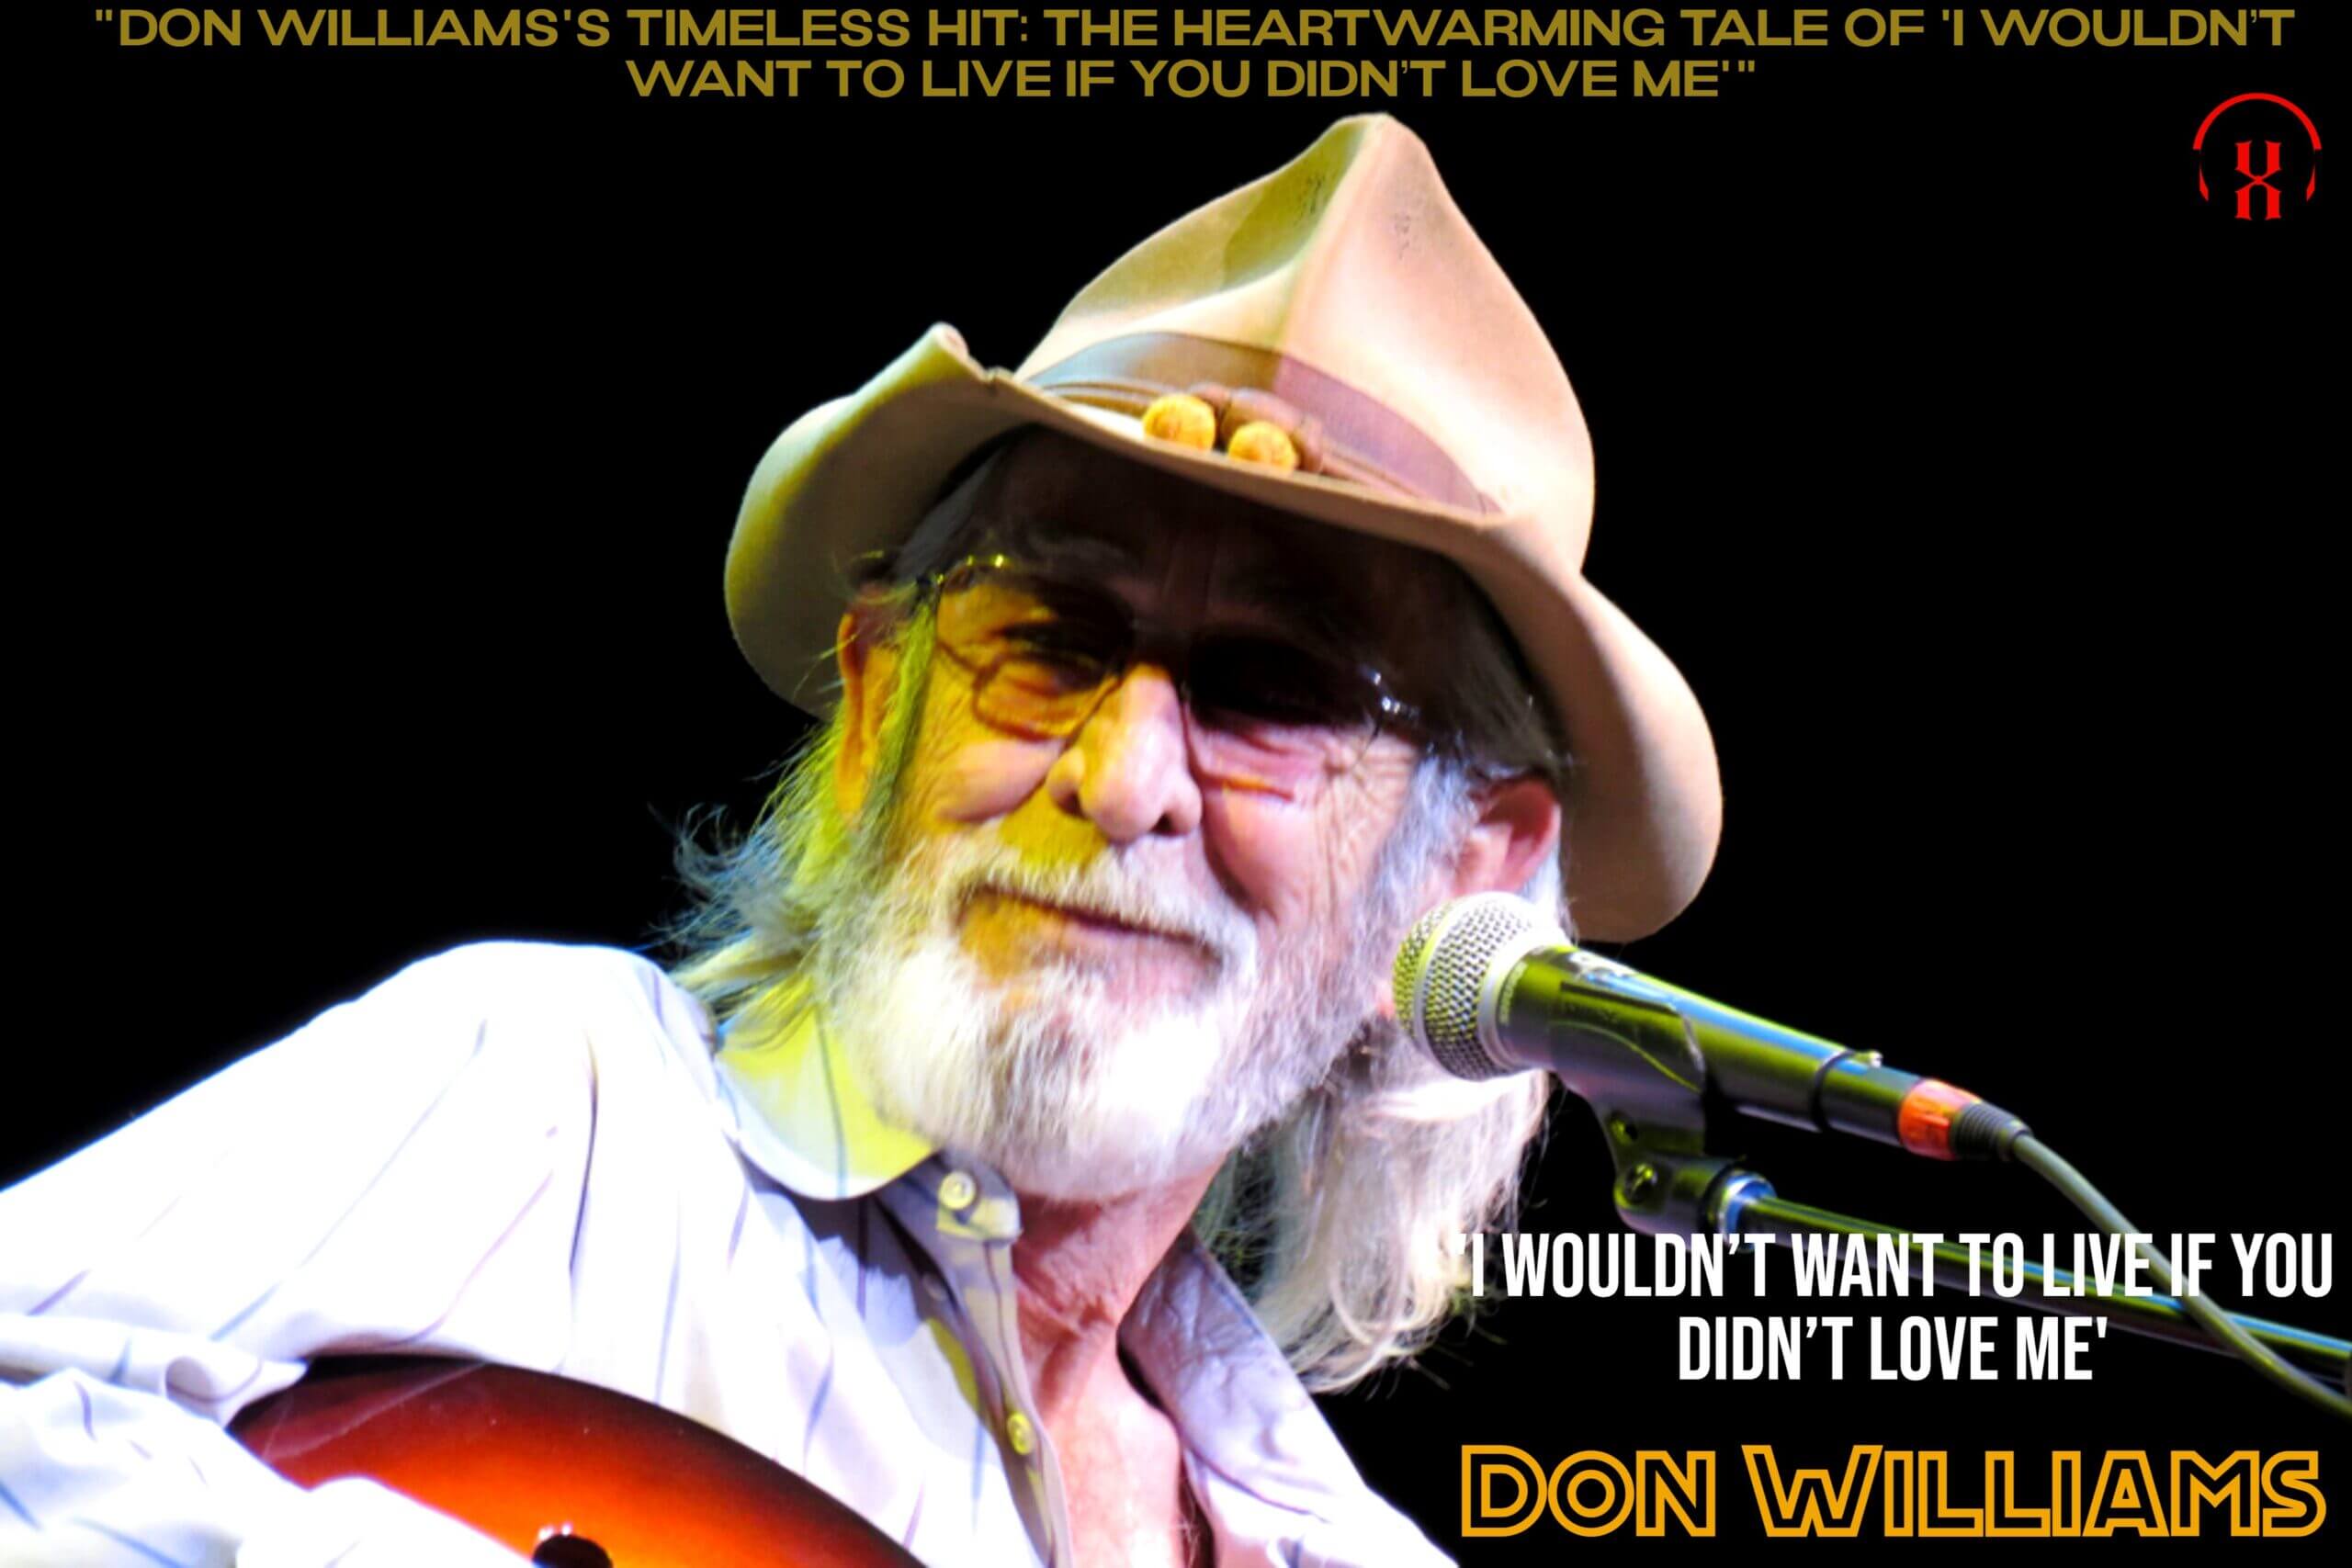 “Don Williams’s Timeless Hit: The Heartwarming Tale of ‘I Wouldn’t Want To Live If You Didn’t Love Me'”